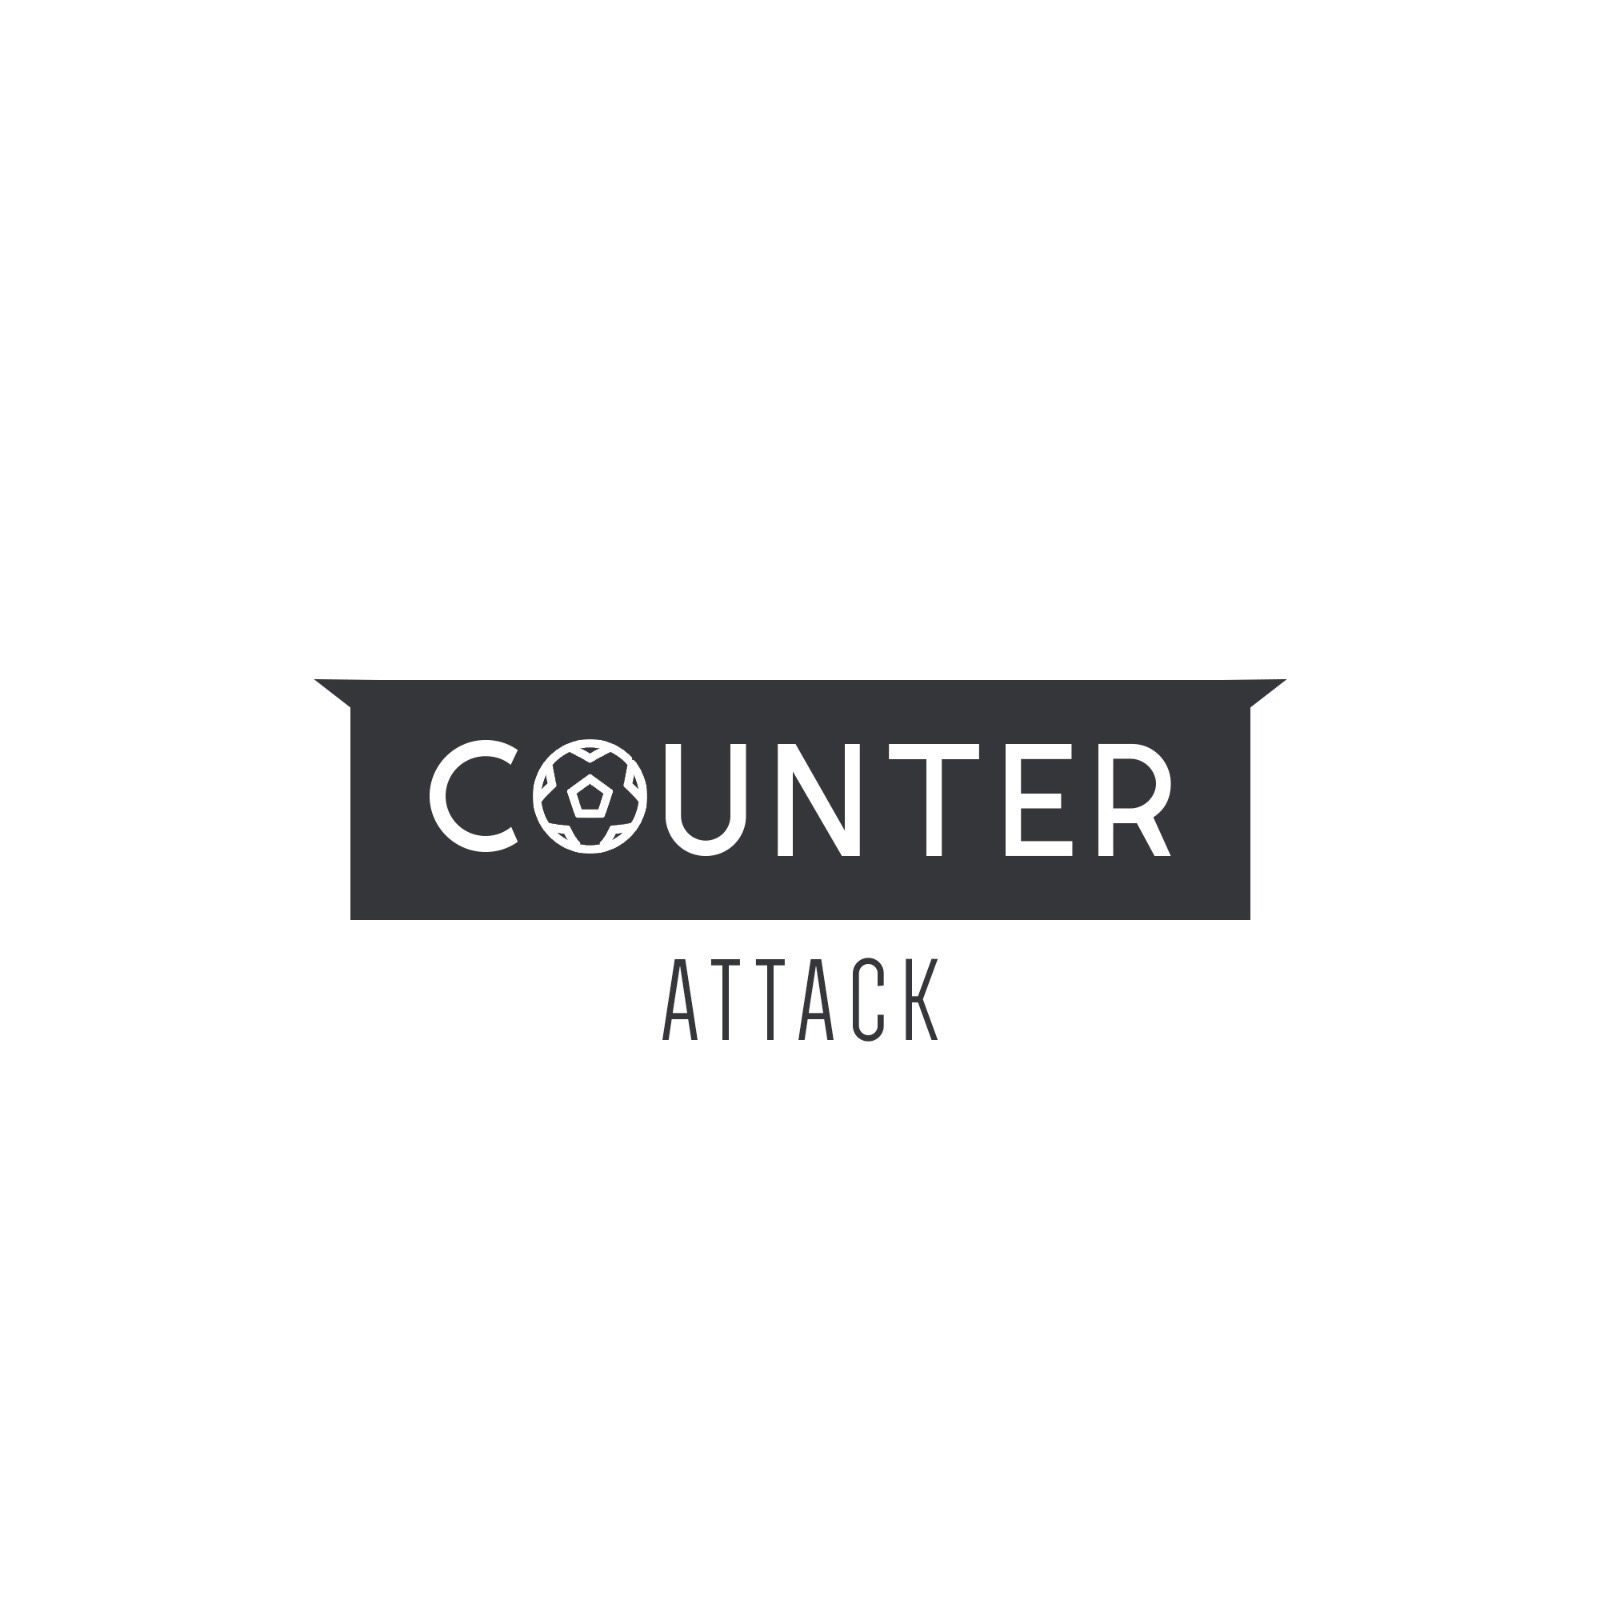 Counter Attack - Episode 151 - Kevin Stewart and Bradley Johnson Talk Football & Property